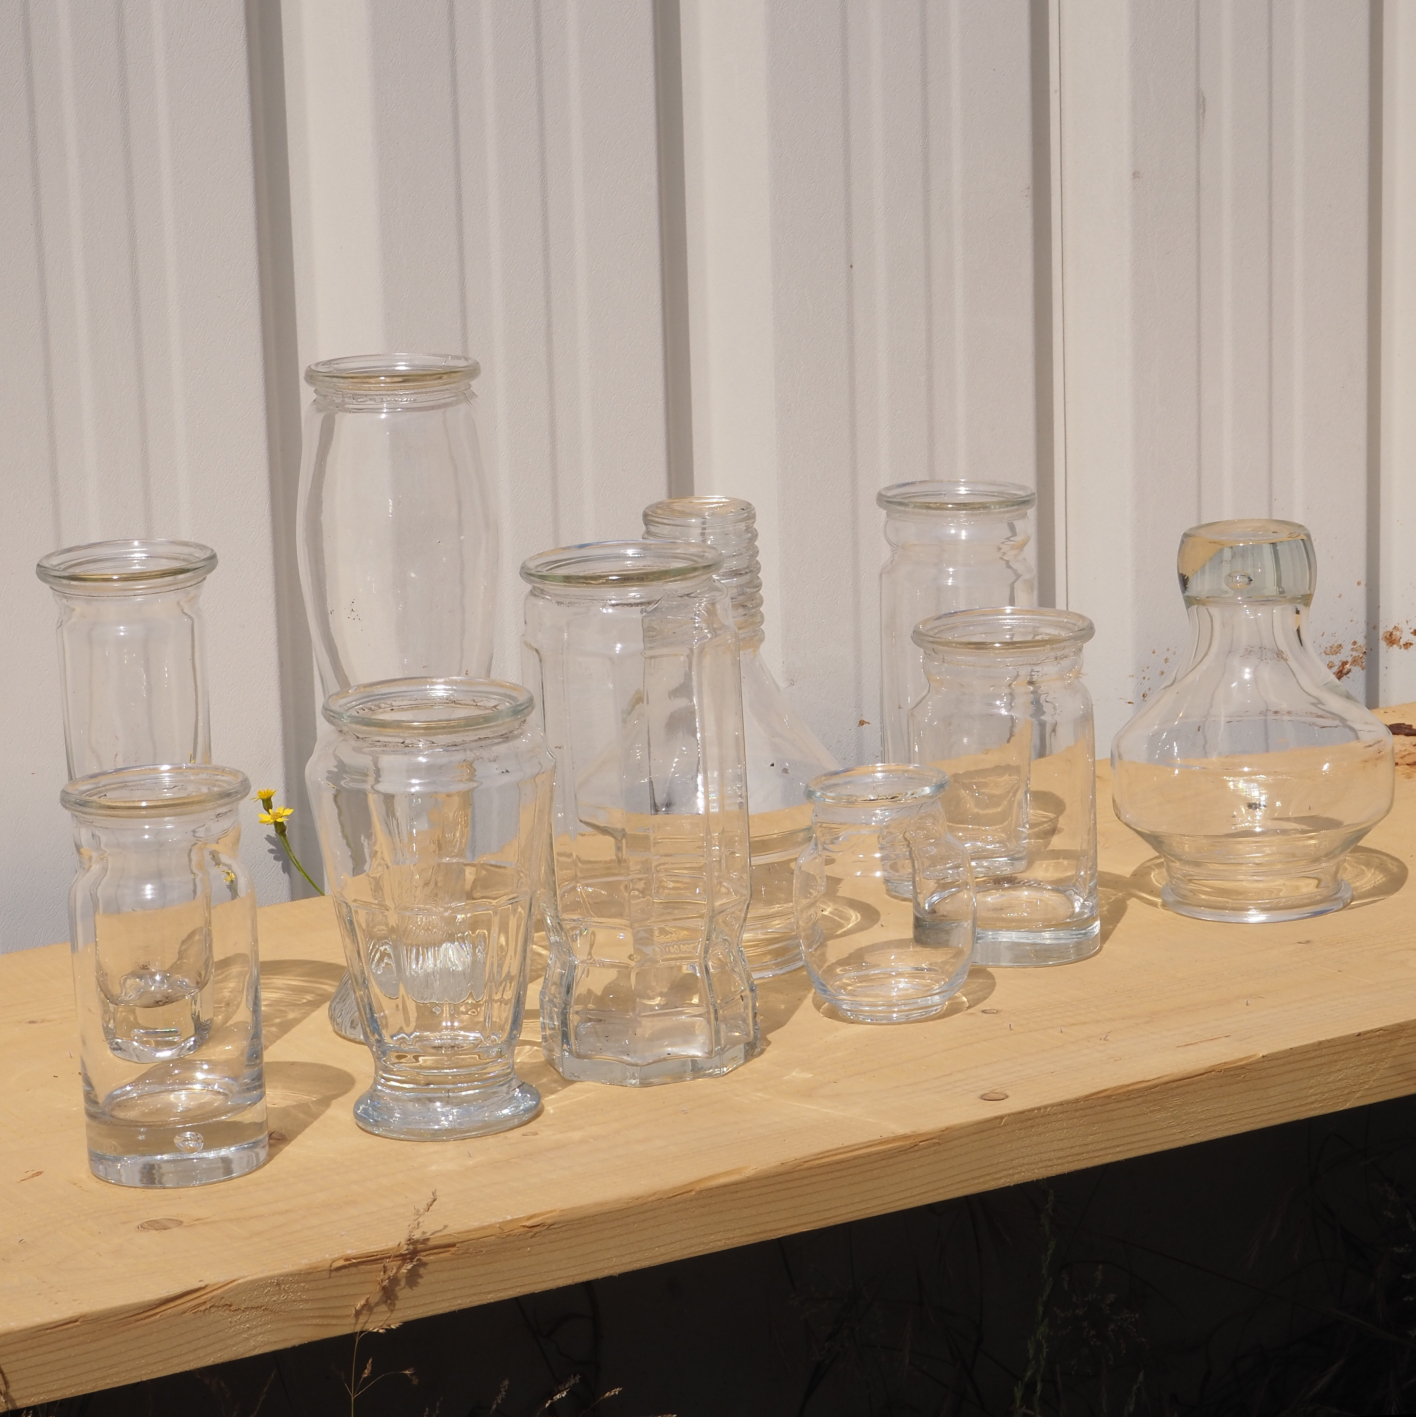 Glass pieces from Durobor Factory